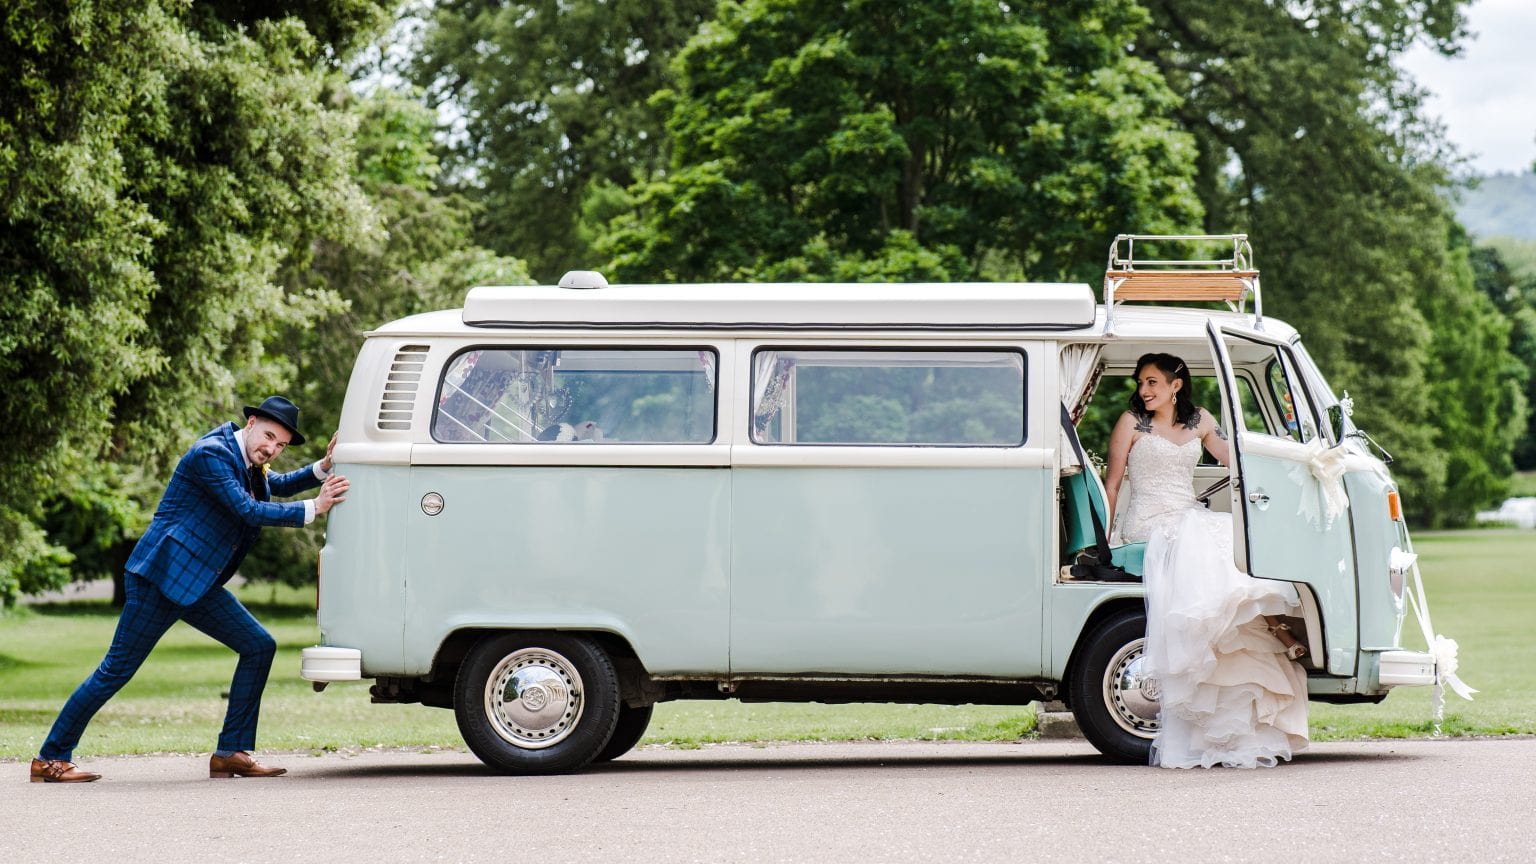 A newlywed couple pose in front of a stylish VW camper on their wedding day at Pittville Park in Cheltenham. The photographer is Pedge Olamaee of Pedge Photography